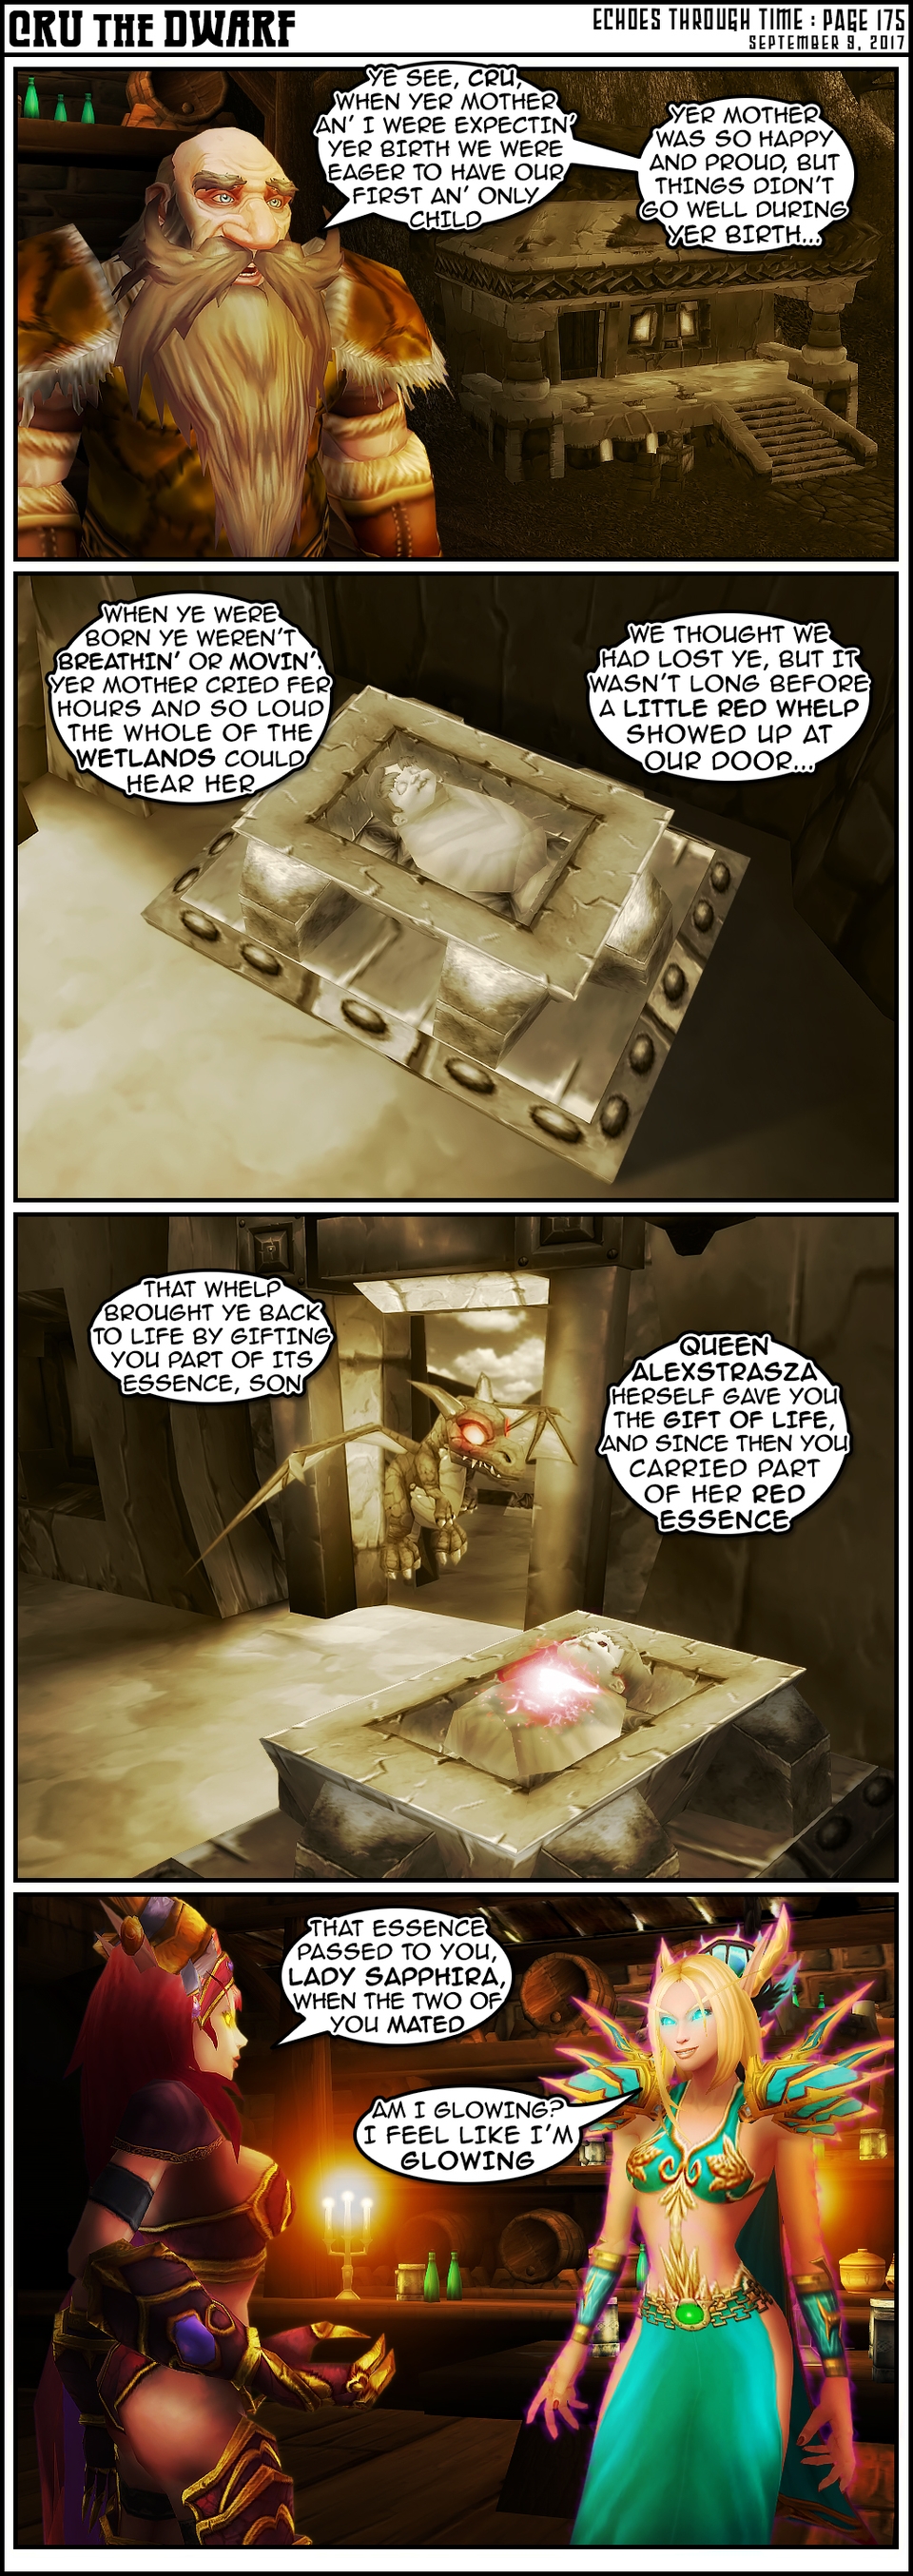 Echoes Through Time - Pg 175 “Red Essence”